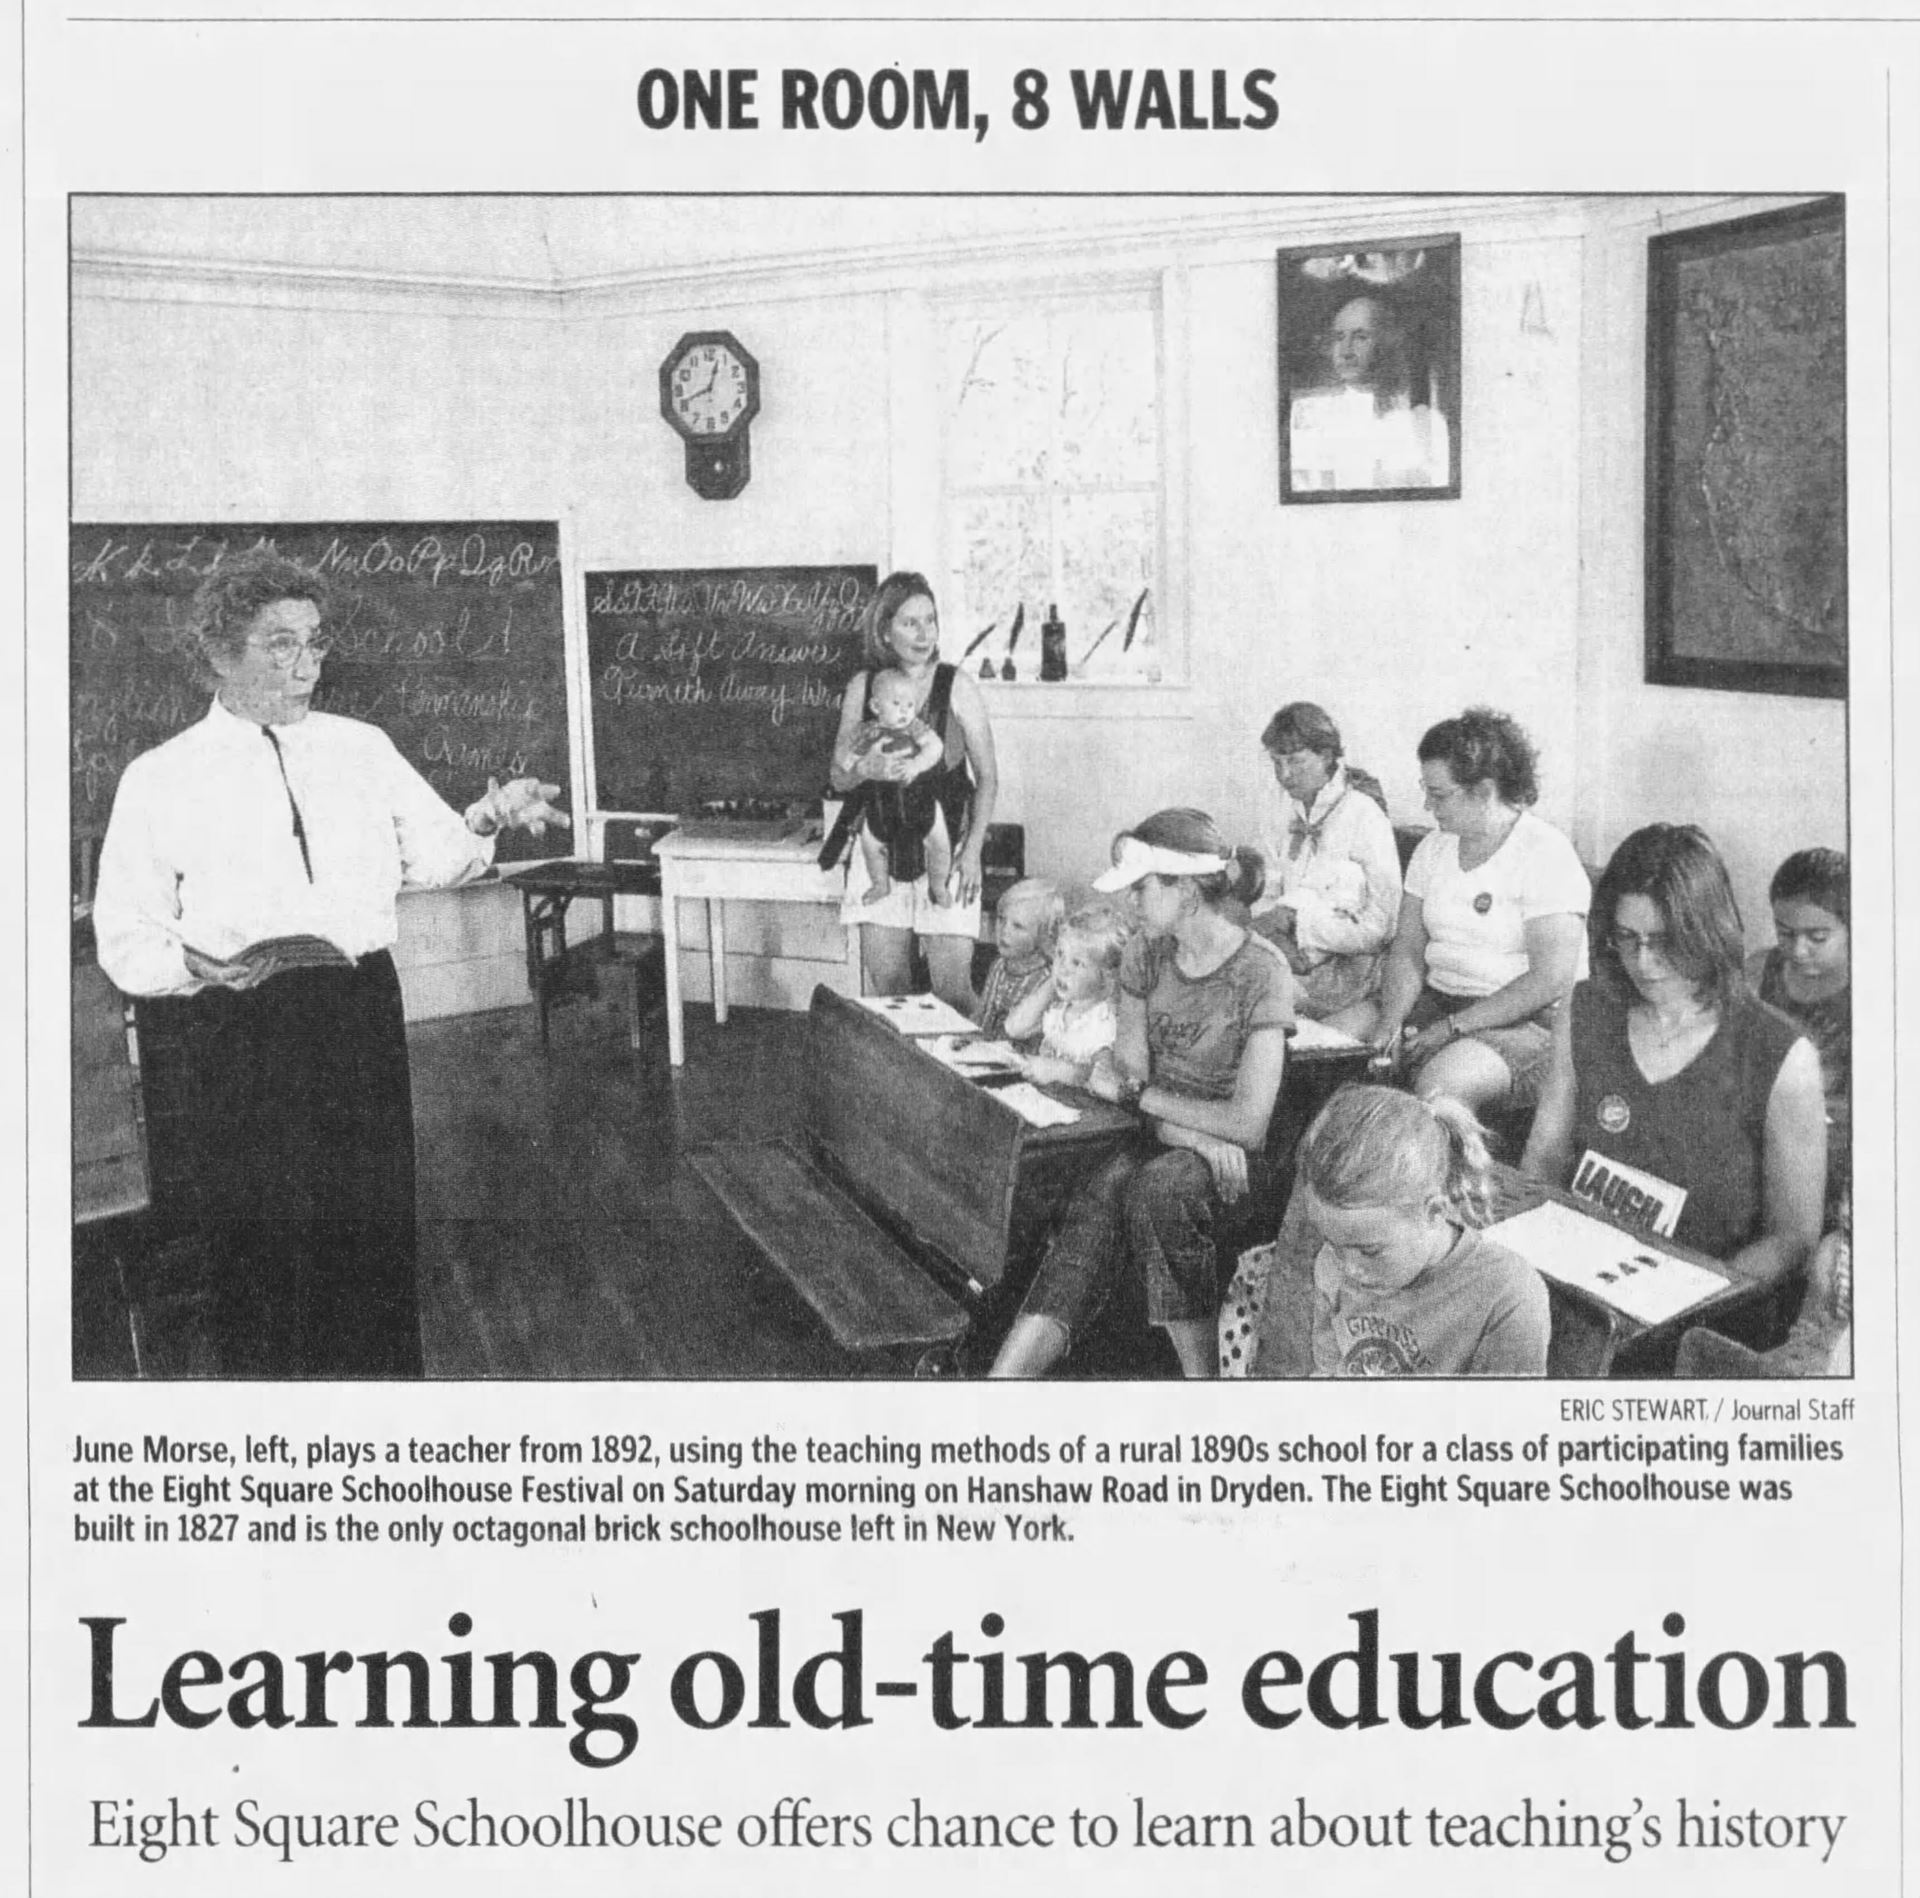 Newspaper article titled “Learning old-time education” with an image of families participating in the eight square schoolhouse learning experience